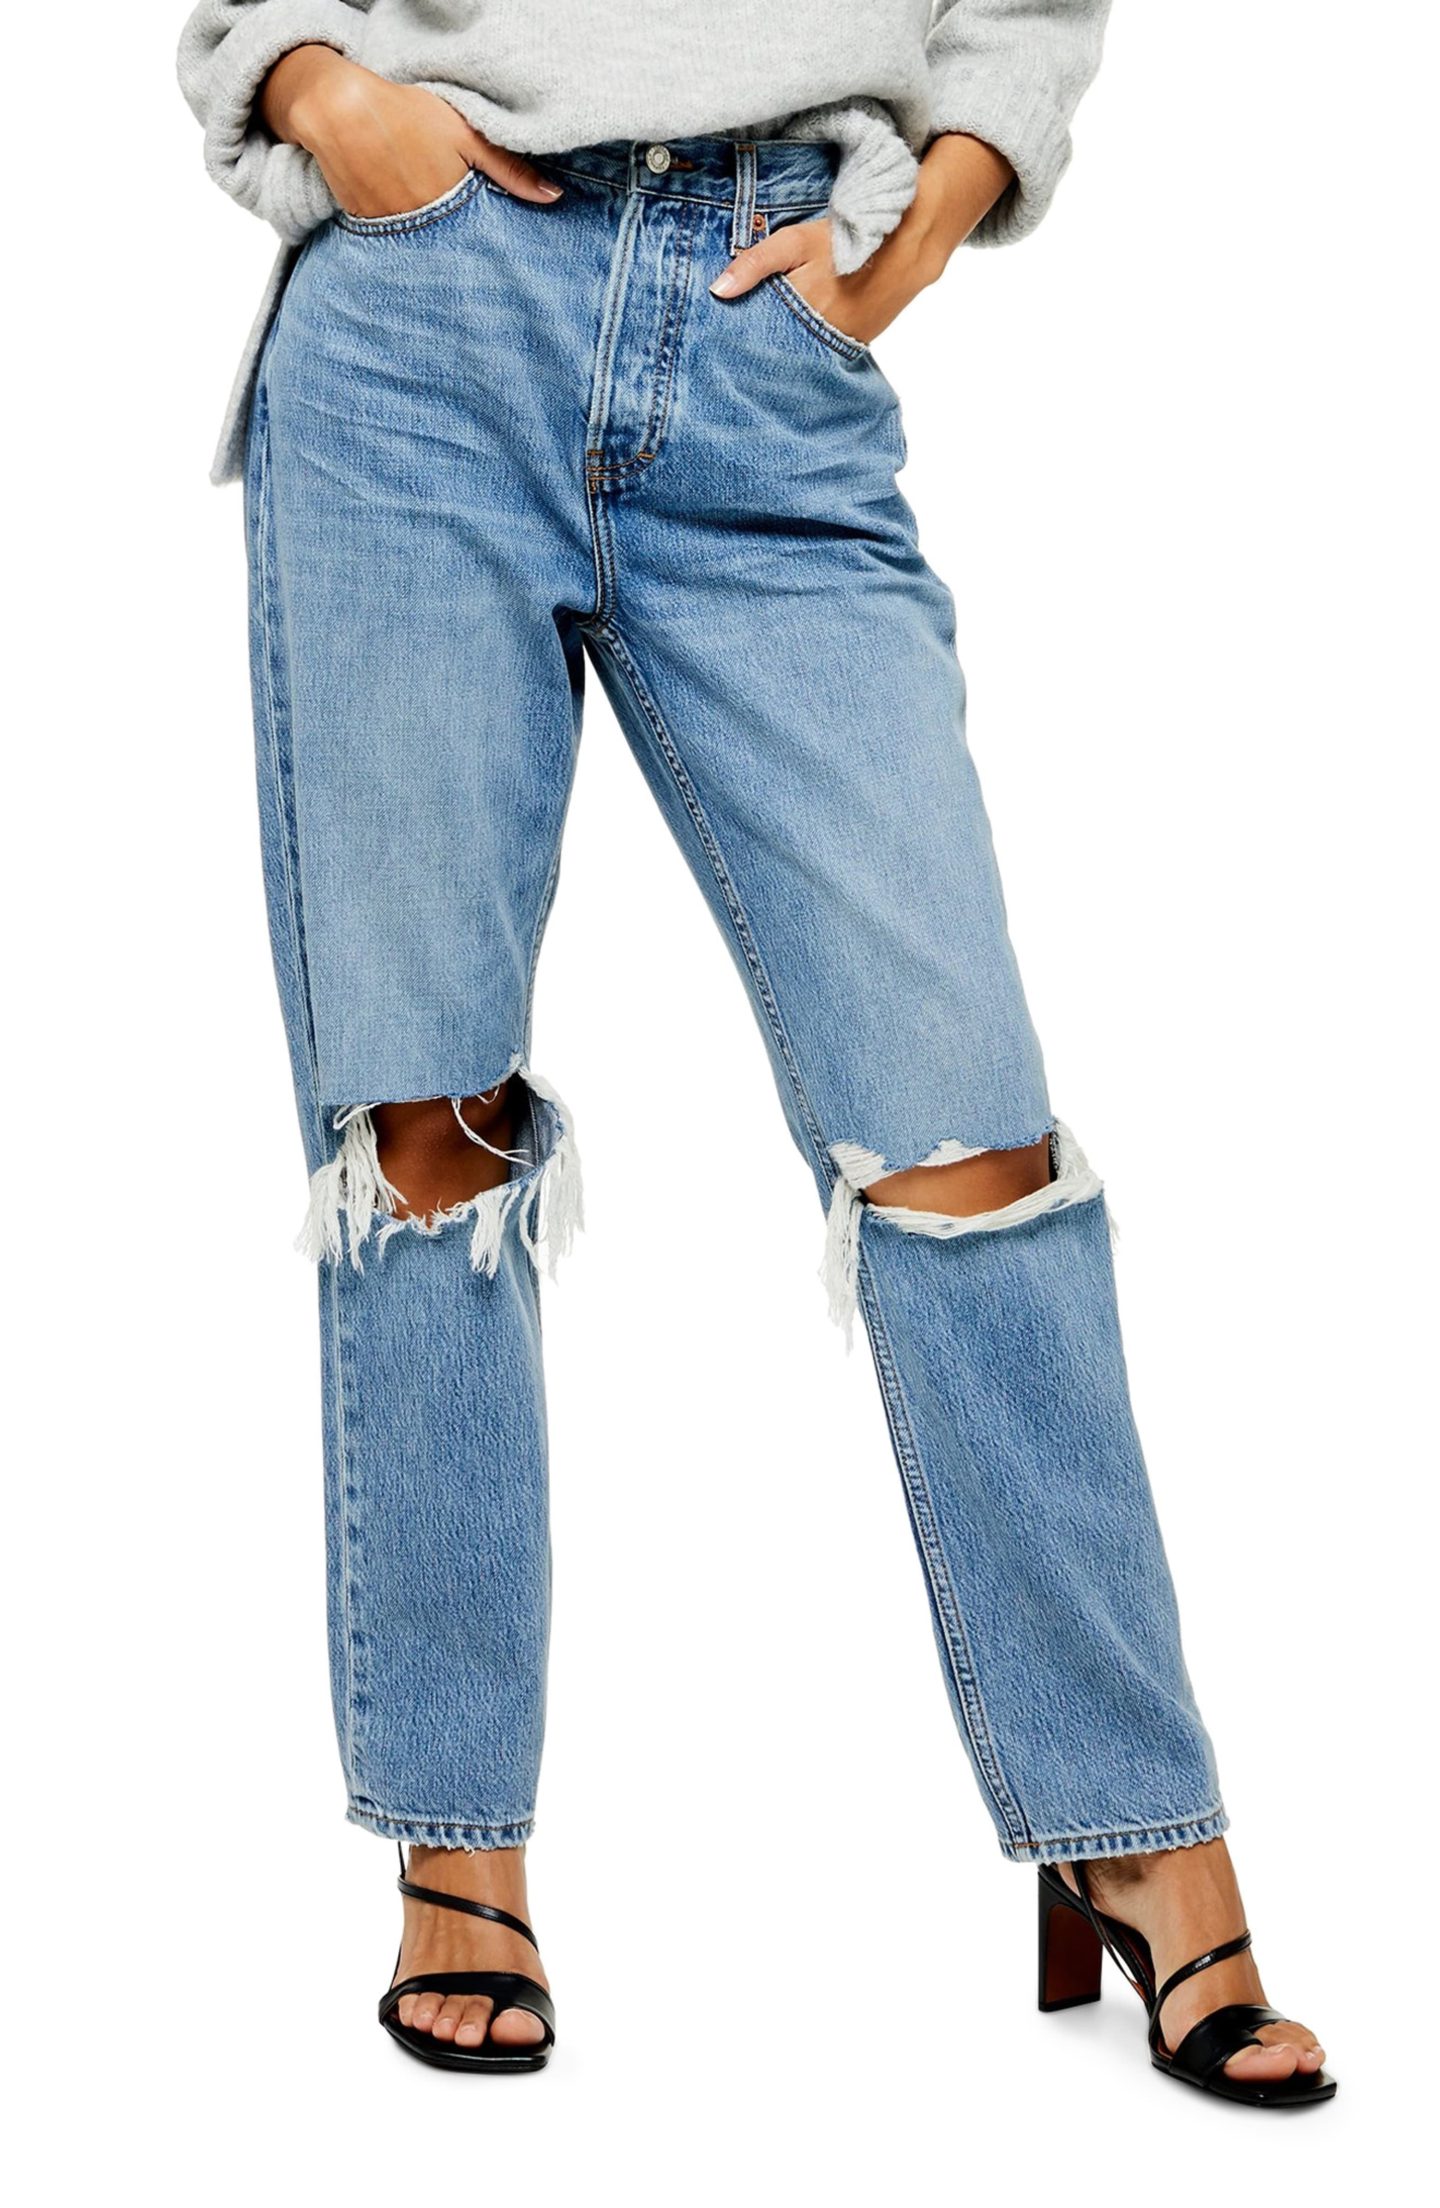 dad style jeans